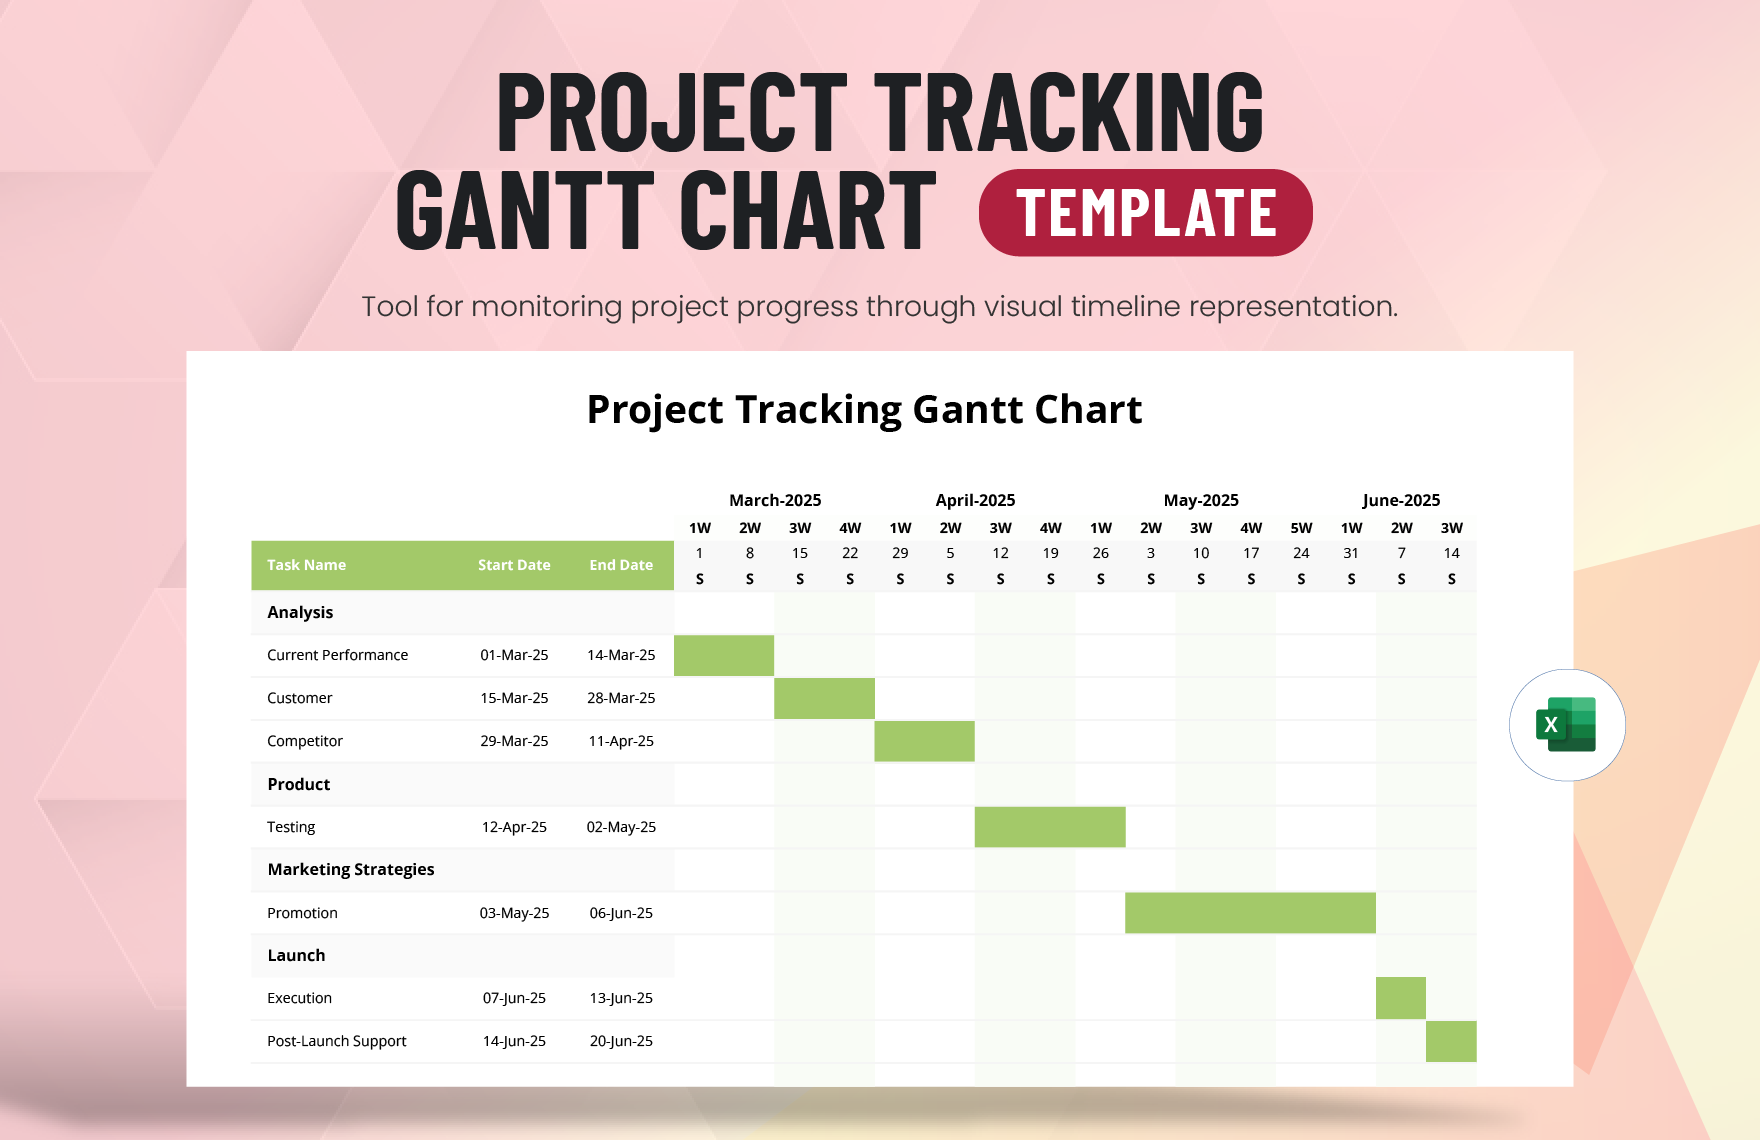 Project Tracking Gantt Chart Template in Excel